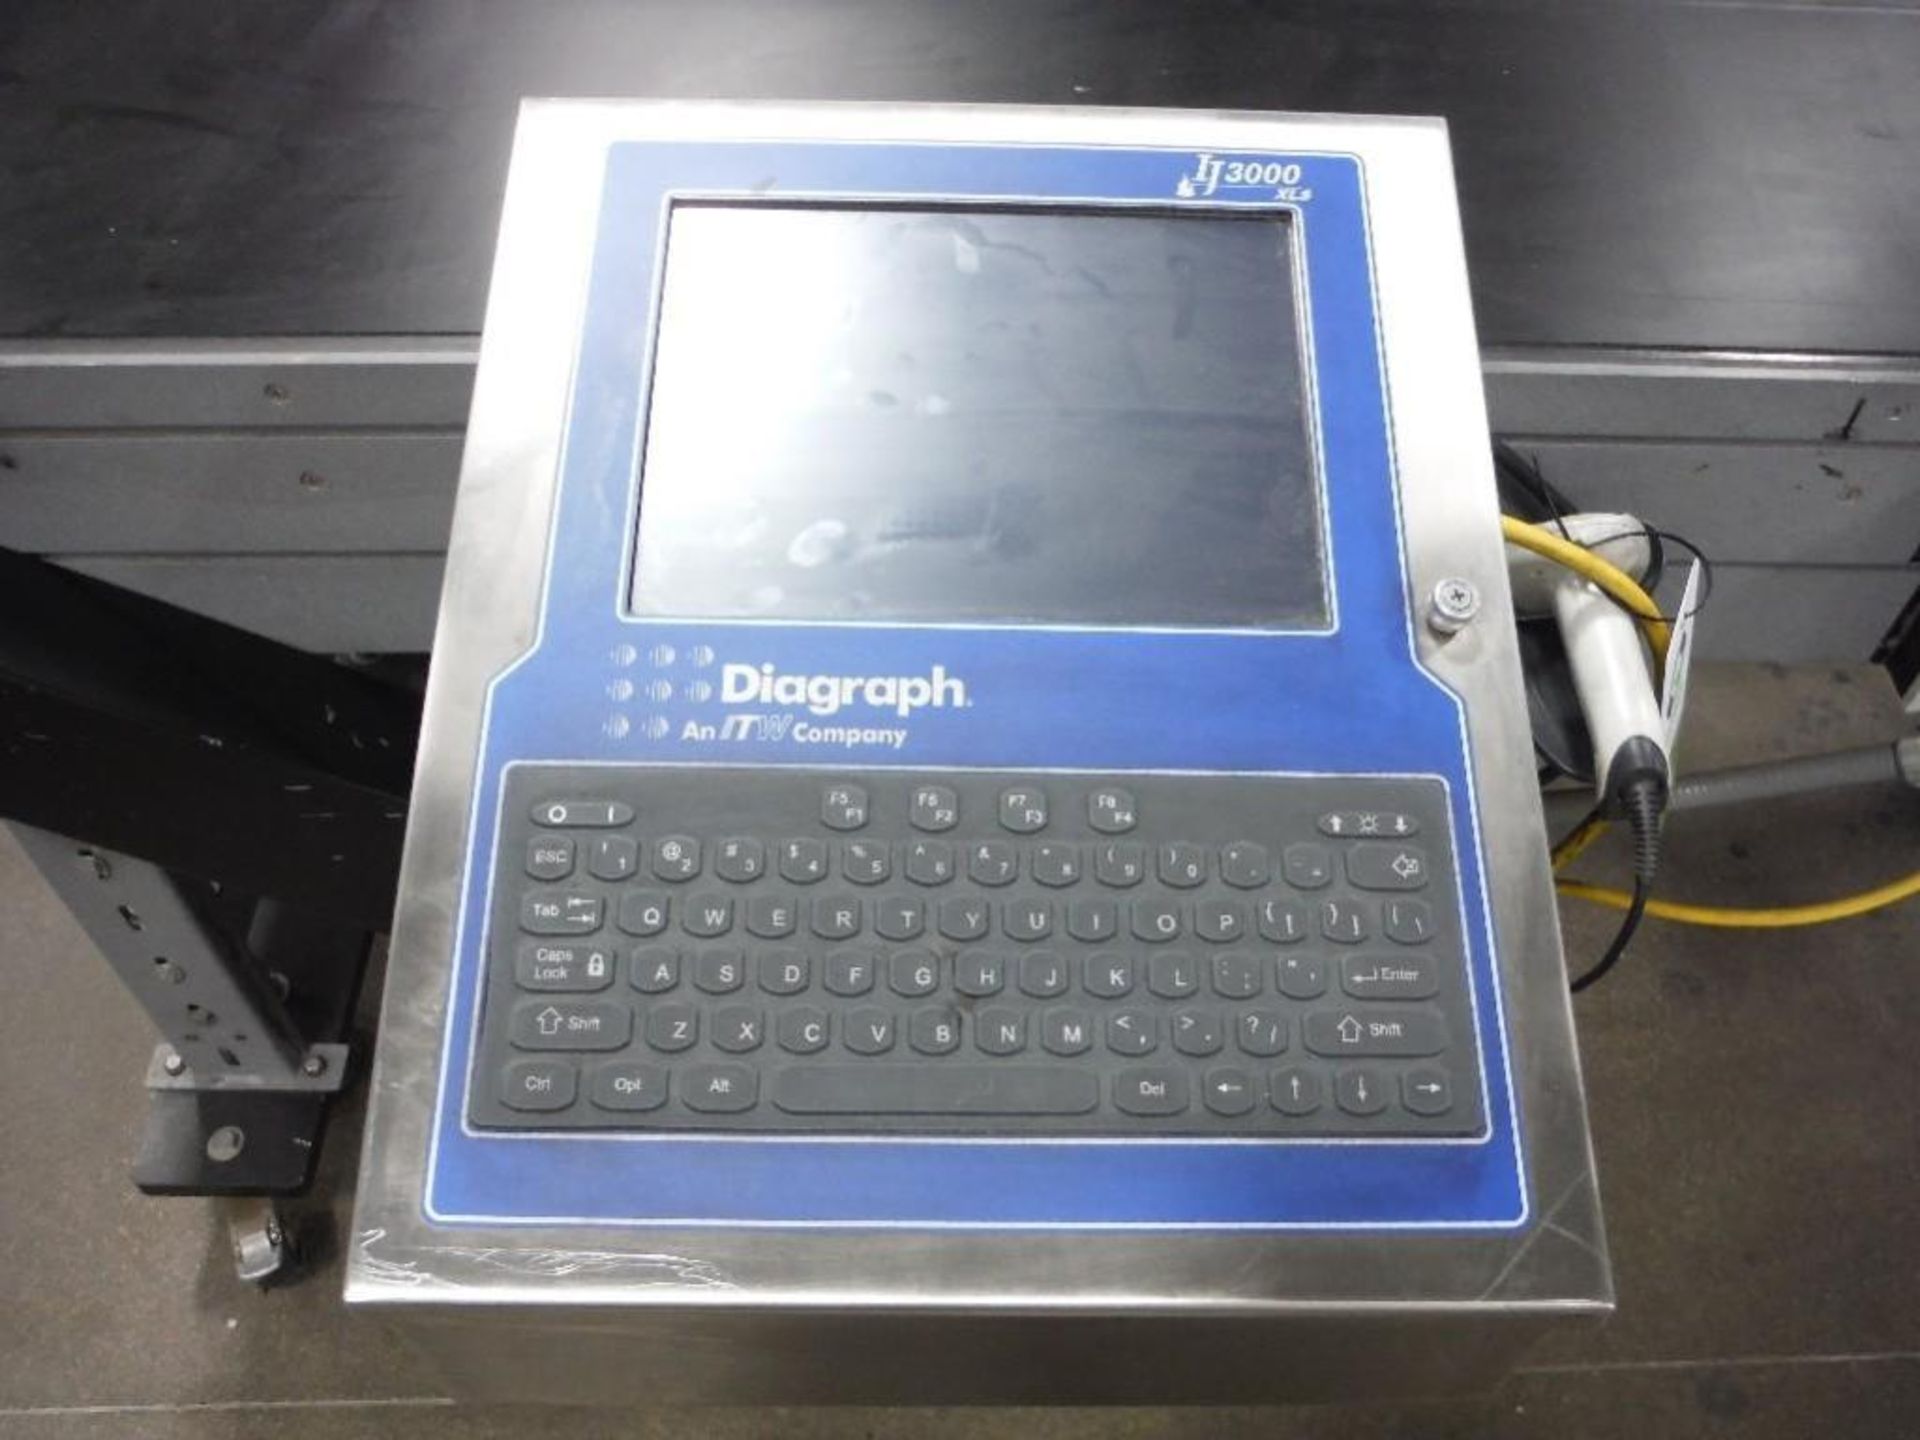 Diagraph IJ3000 xls ink jet coder with conveyor bed, 92 in. long x 27 in. wide x 40 in. tall, steel - Image 2 of 7